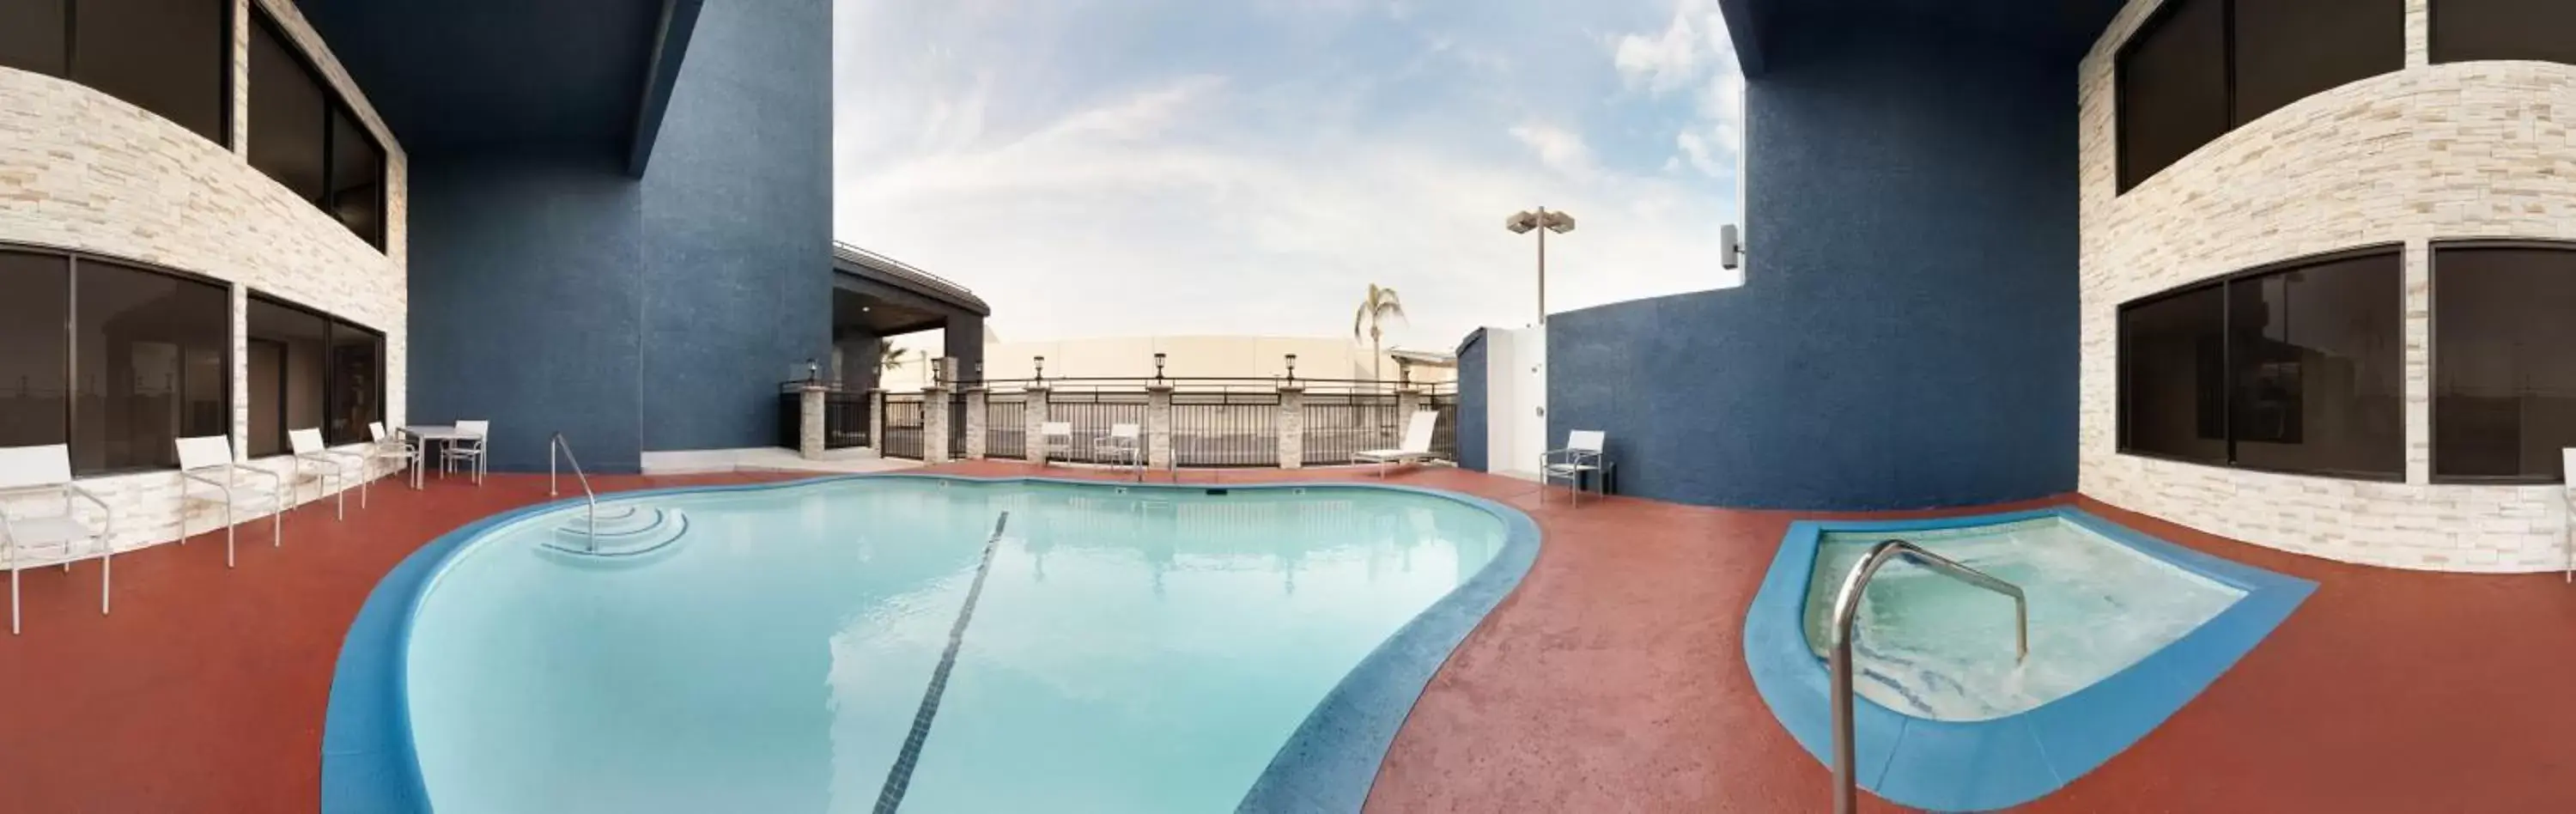 Hot Tub, Swimming Pool in Country Inn & Suites by Radisson, Bakersfield, CA